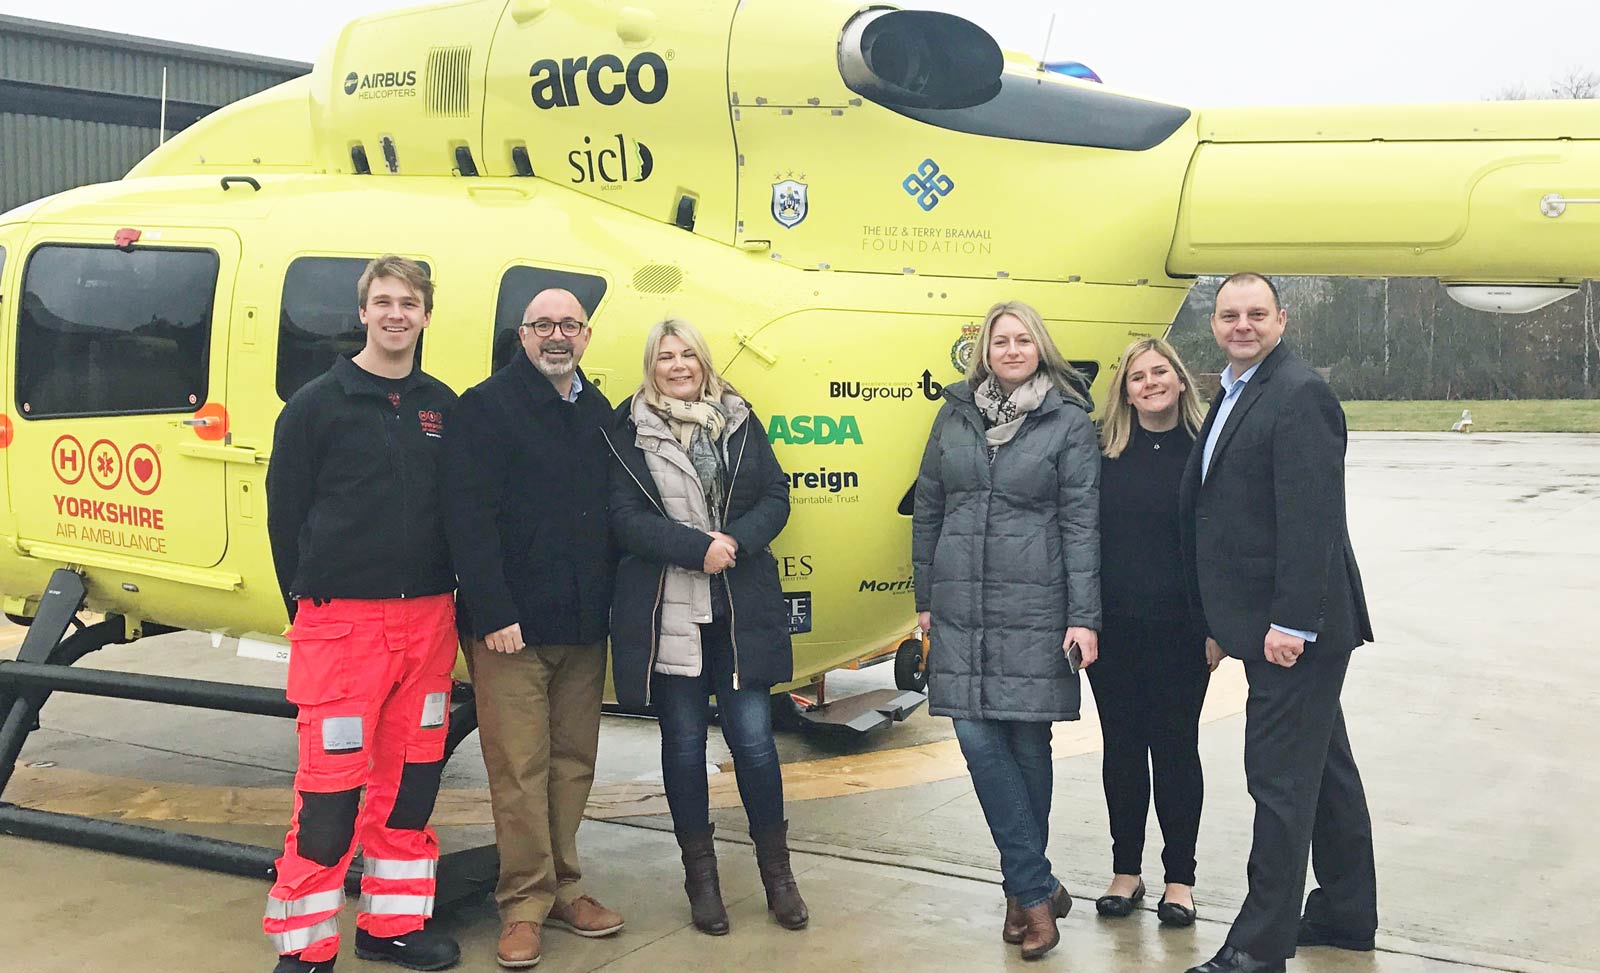 From L to R: Yorkshire Air Ambulance paramedic Kit von Mickwitz, BIU Group Directors Barry Wilson, Helen Walker and Louise Knapton with BIU Charity Partnership Manager Wendy Yarney and Yorkshire Air Ambulance Director of Fundraising Paul Gowland